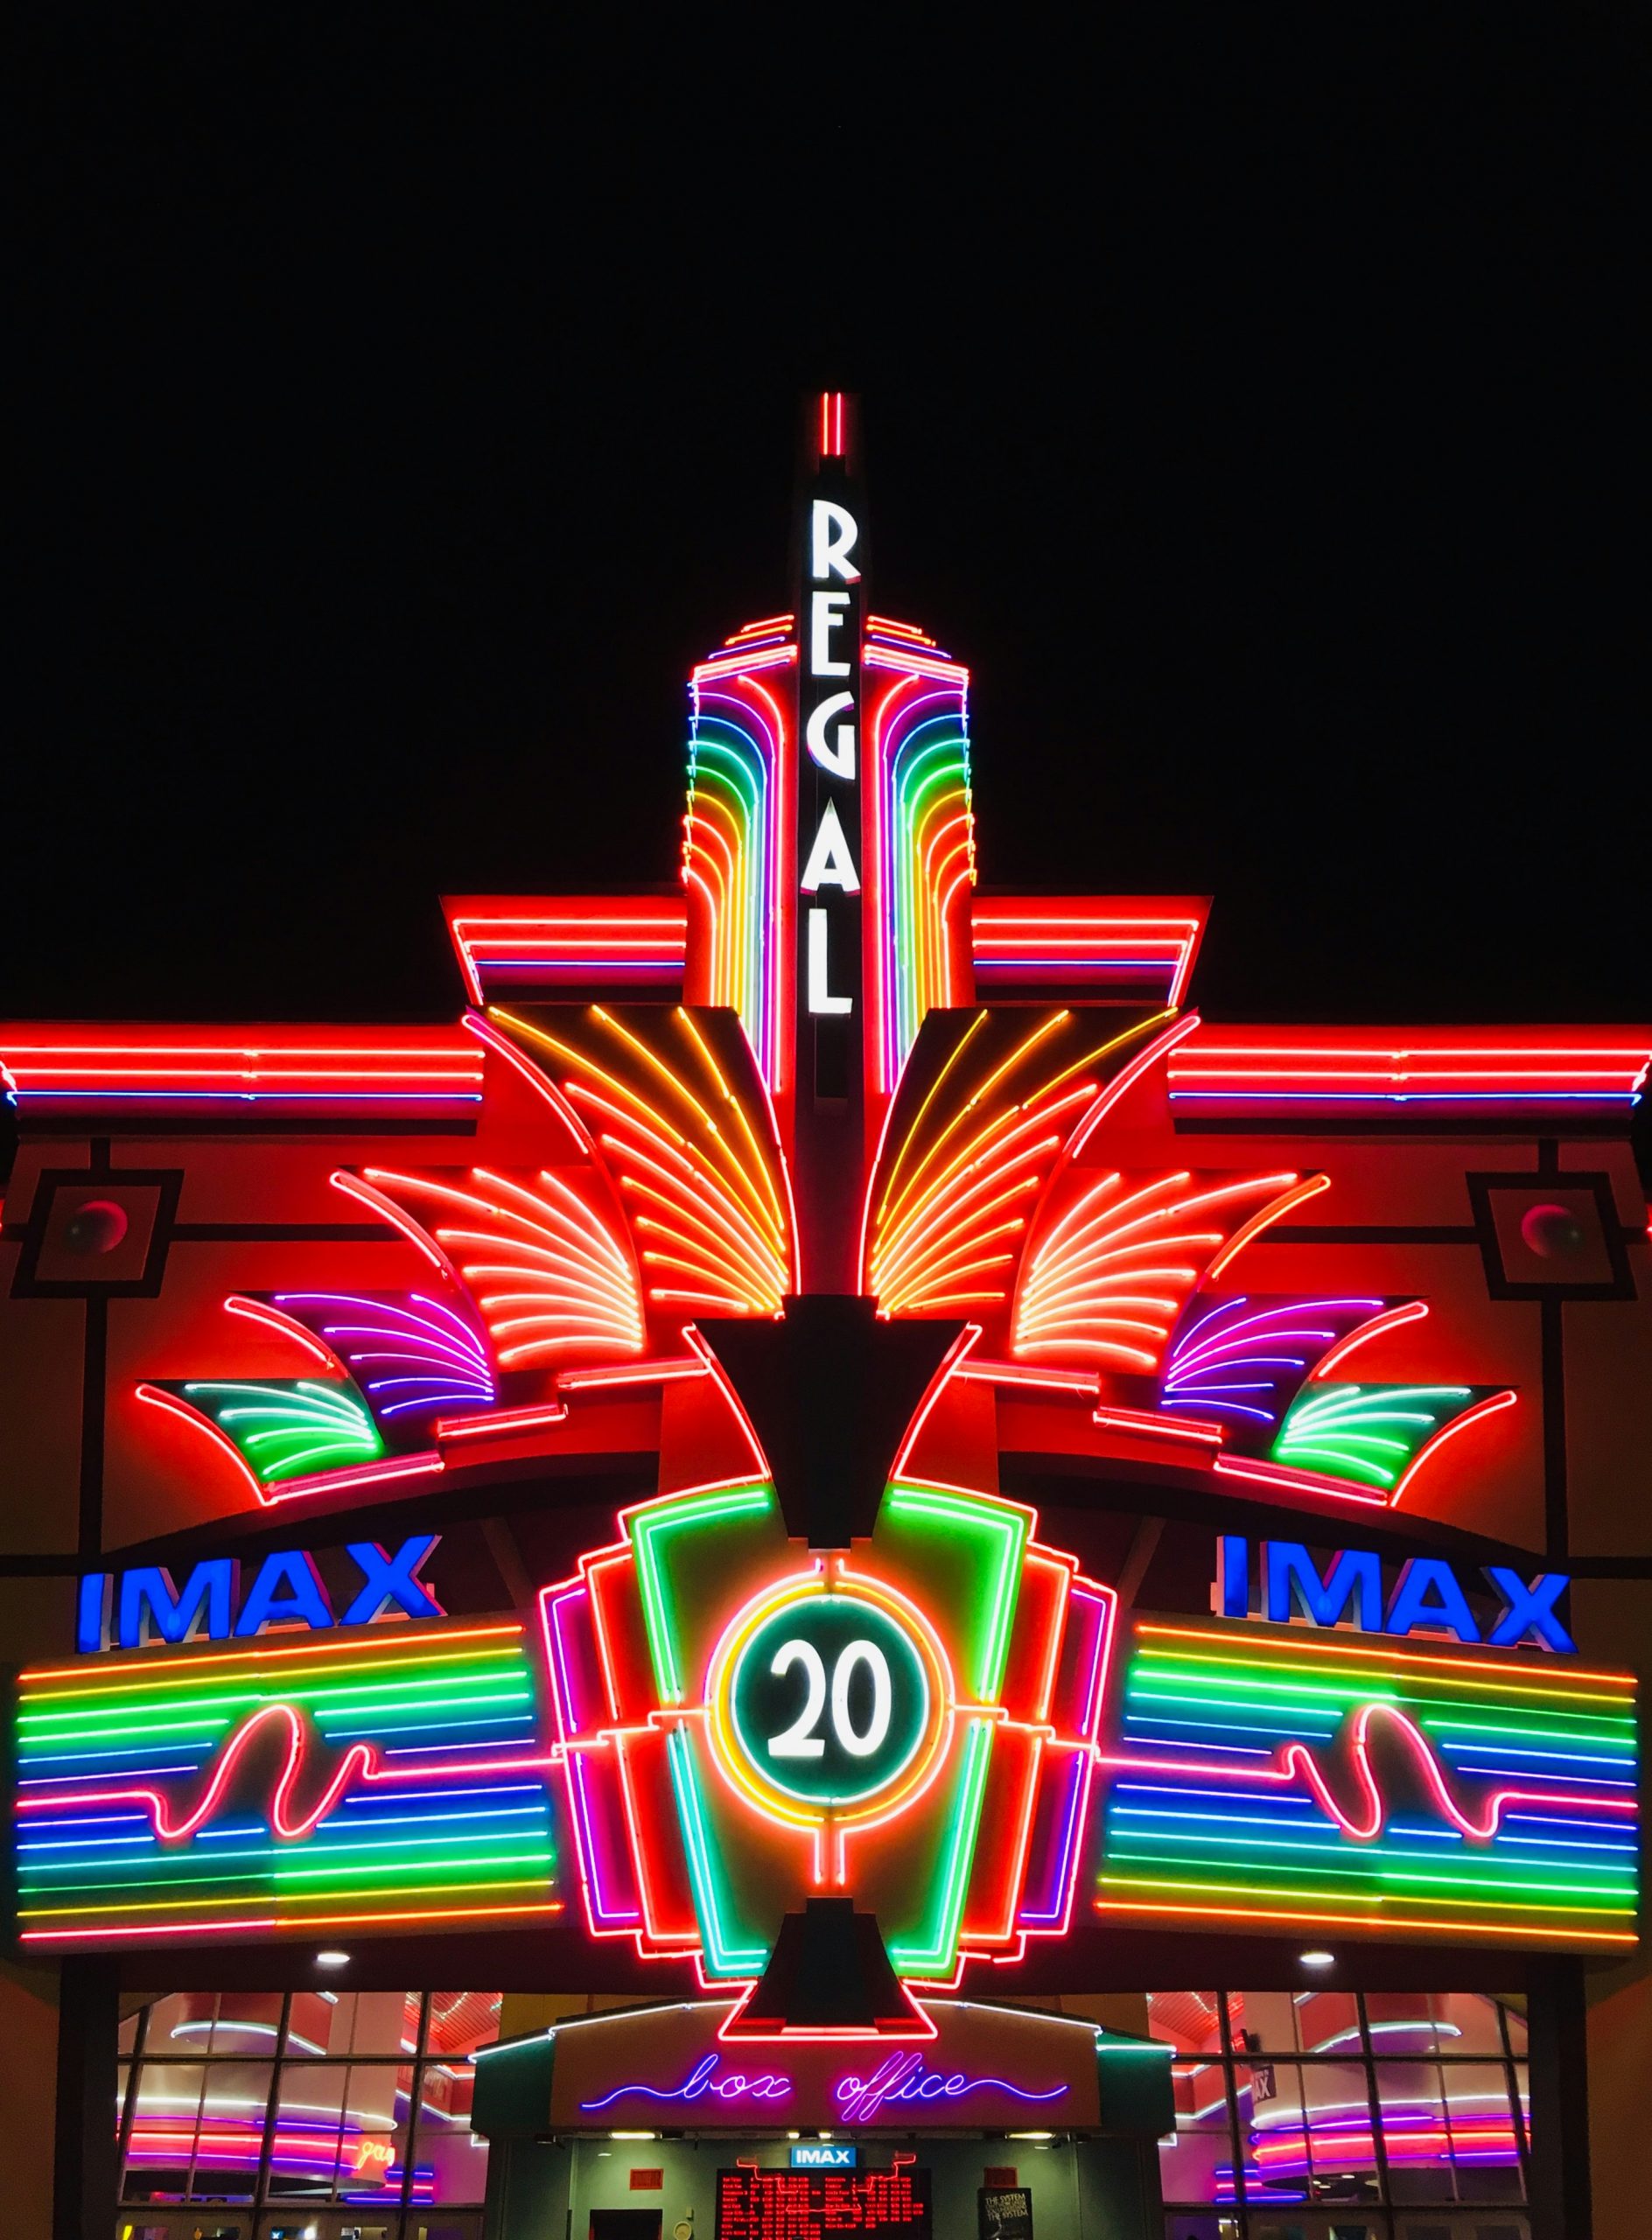 Colorful neon sign outside of a movie theater